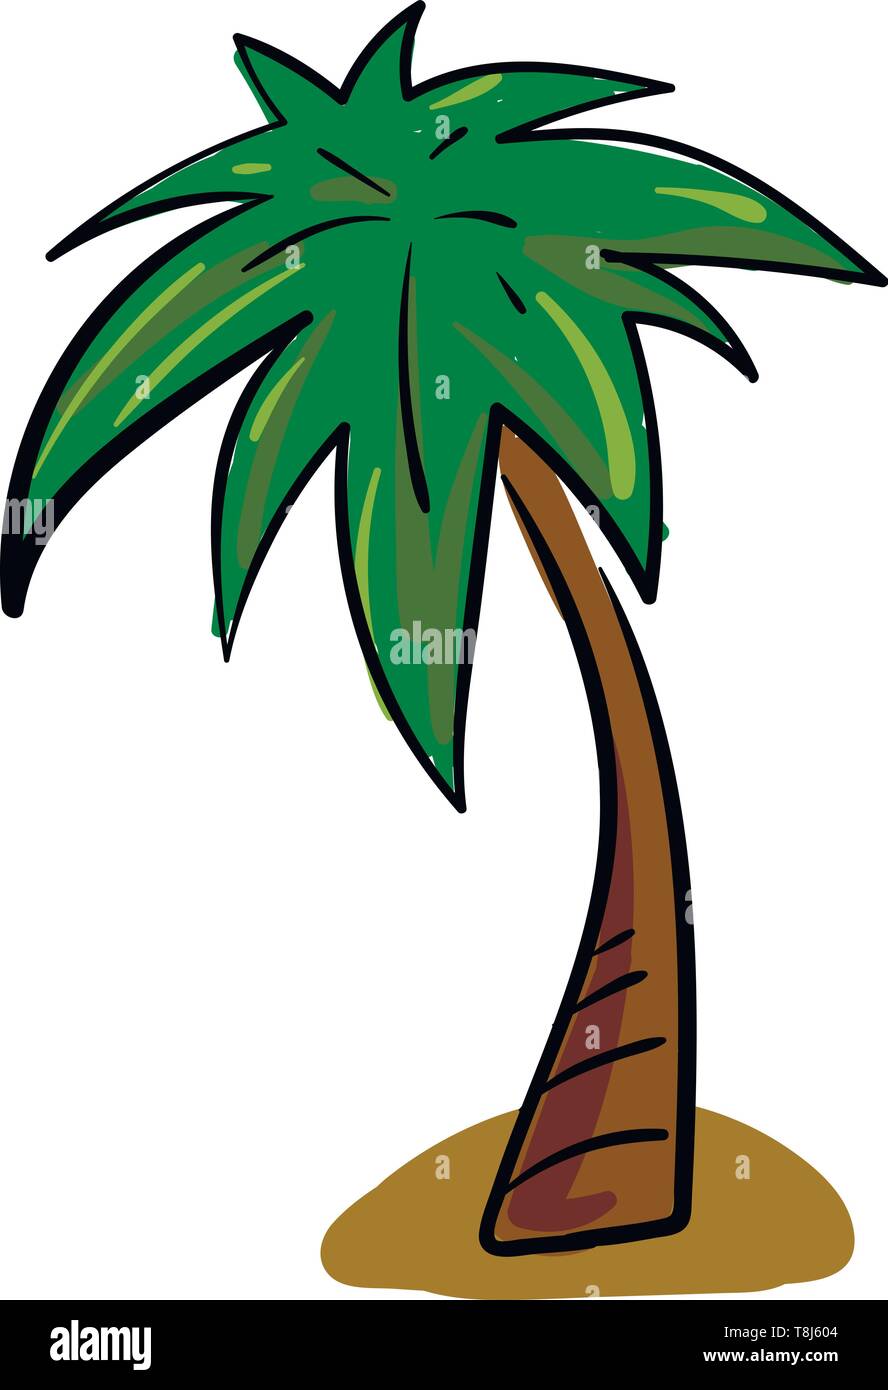 A palm tree having a crown of very long feathered or fan-shaped leaves above the land over a white background, vector, color drawing or illustration. Stock Vector